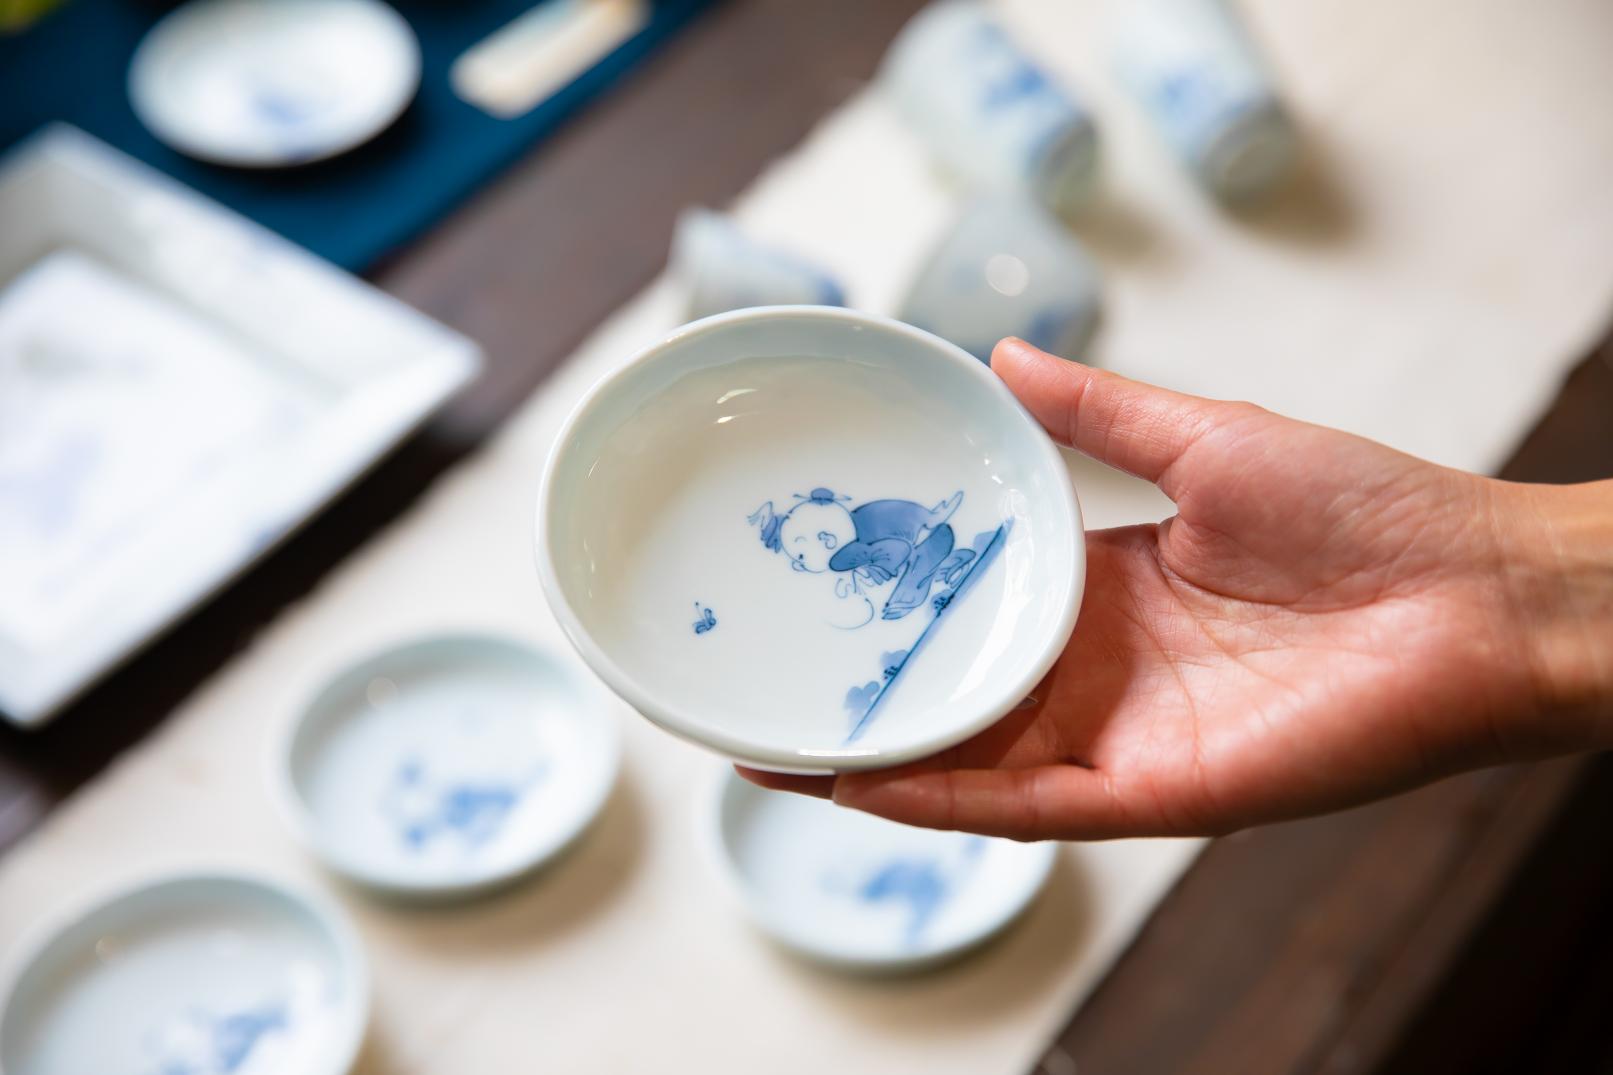 Sasebo’s Japan Heritage 02
Hizen, home of Japanese Porcelain
– A stroll through a profusion of pottery –-0